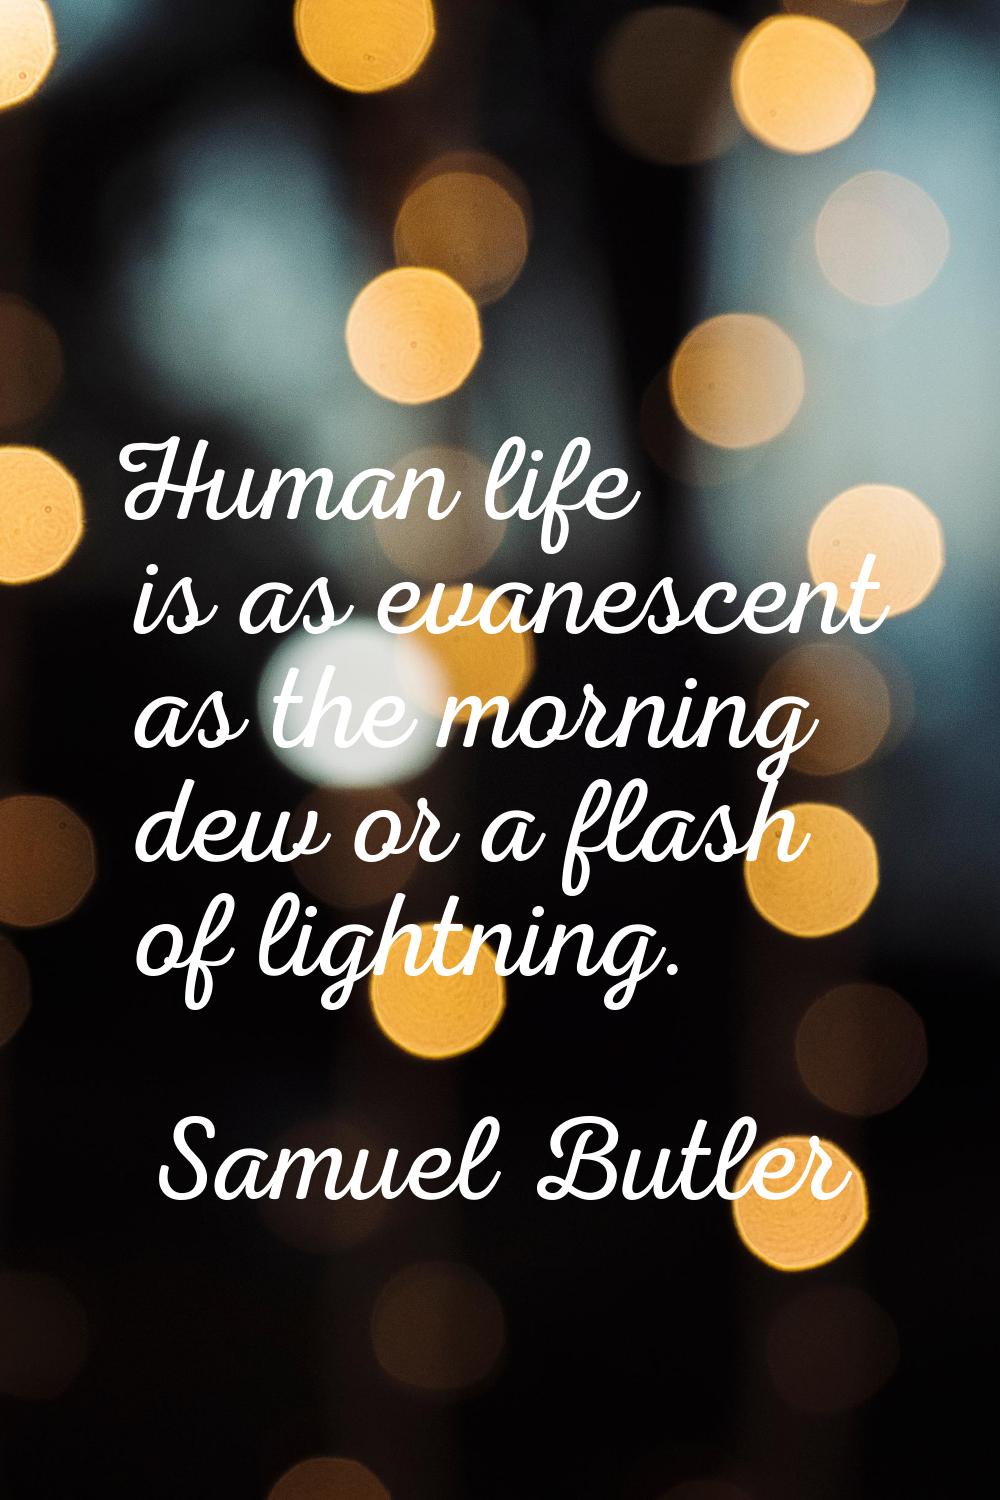 Human life is as evanescent as the morning dew or a flash of lightning.